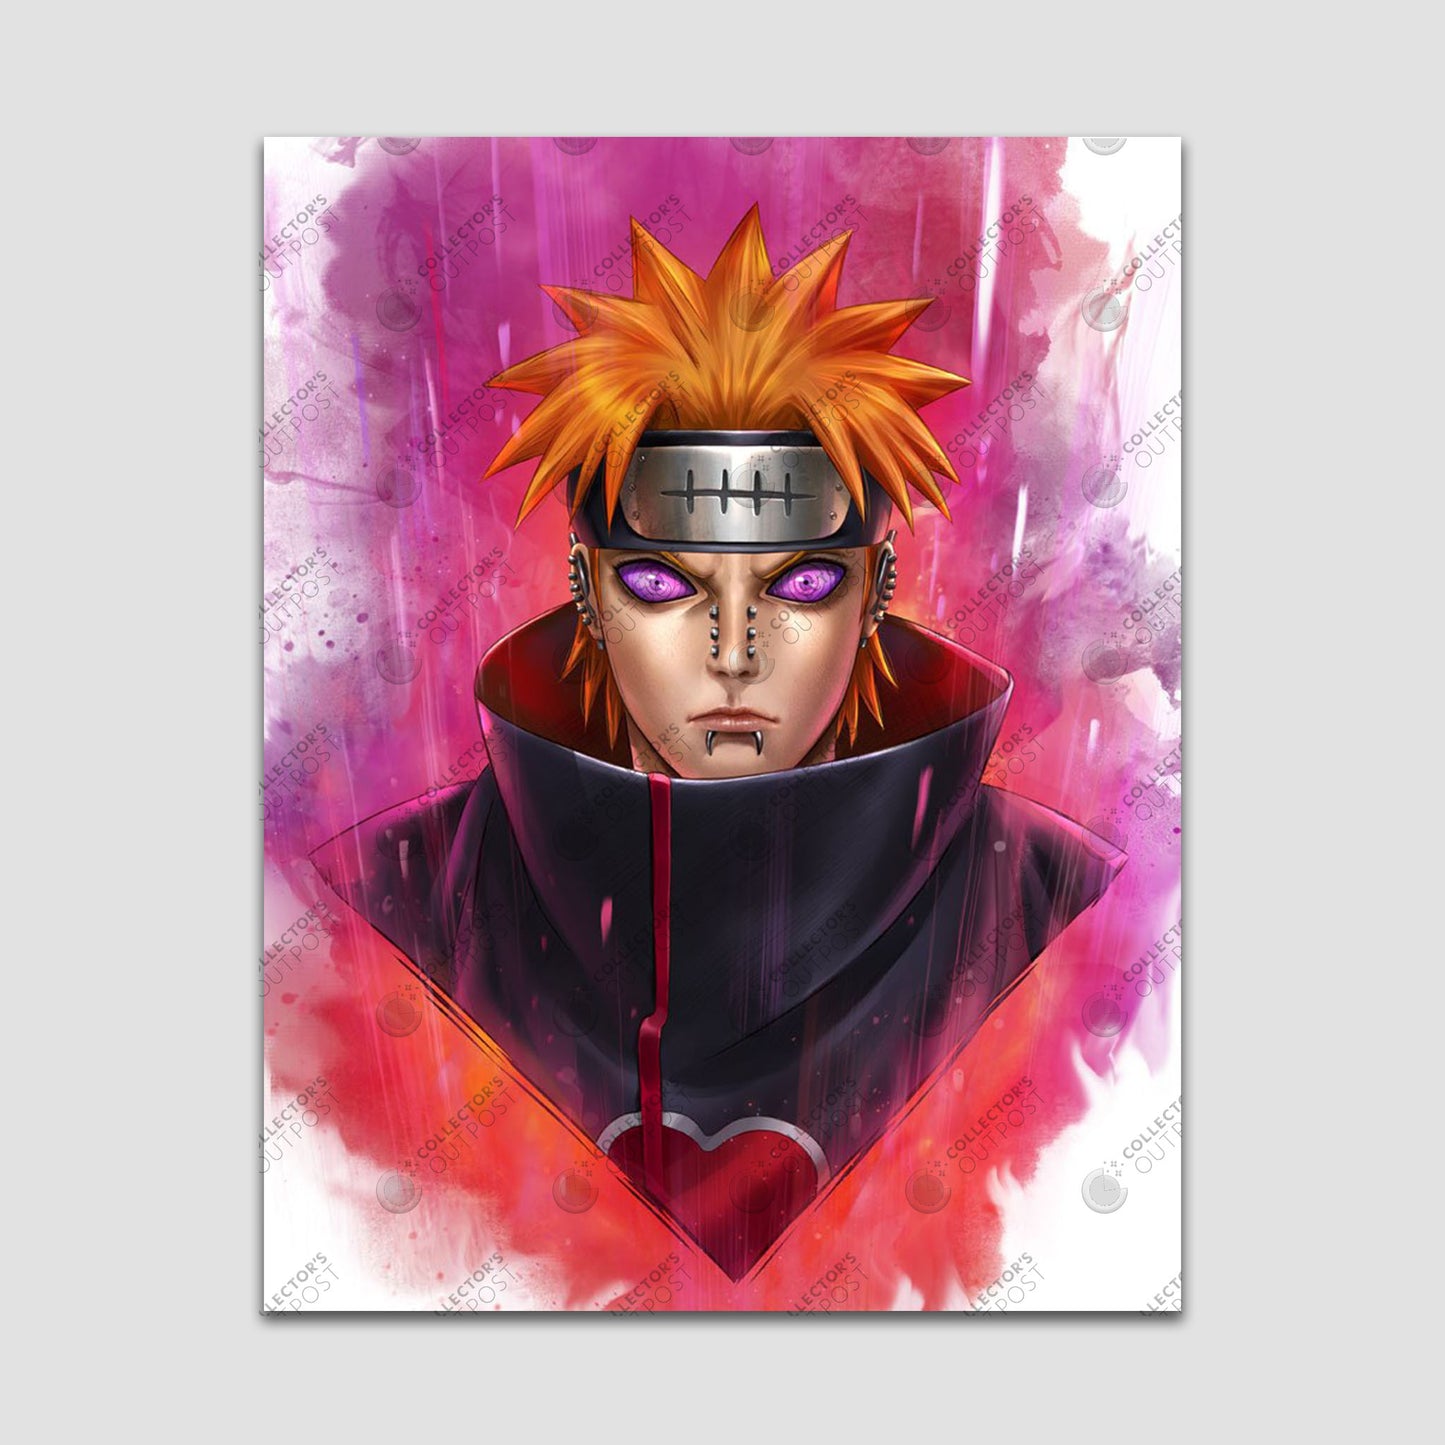 prompthunt: highly detailed painting of pain from naruto shippuden